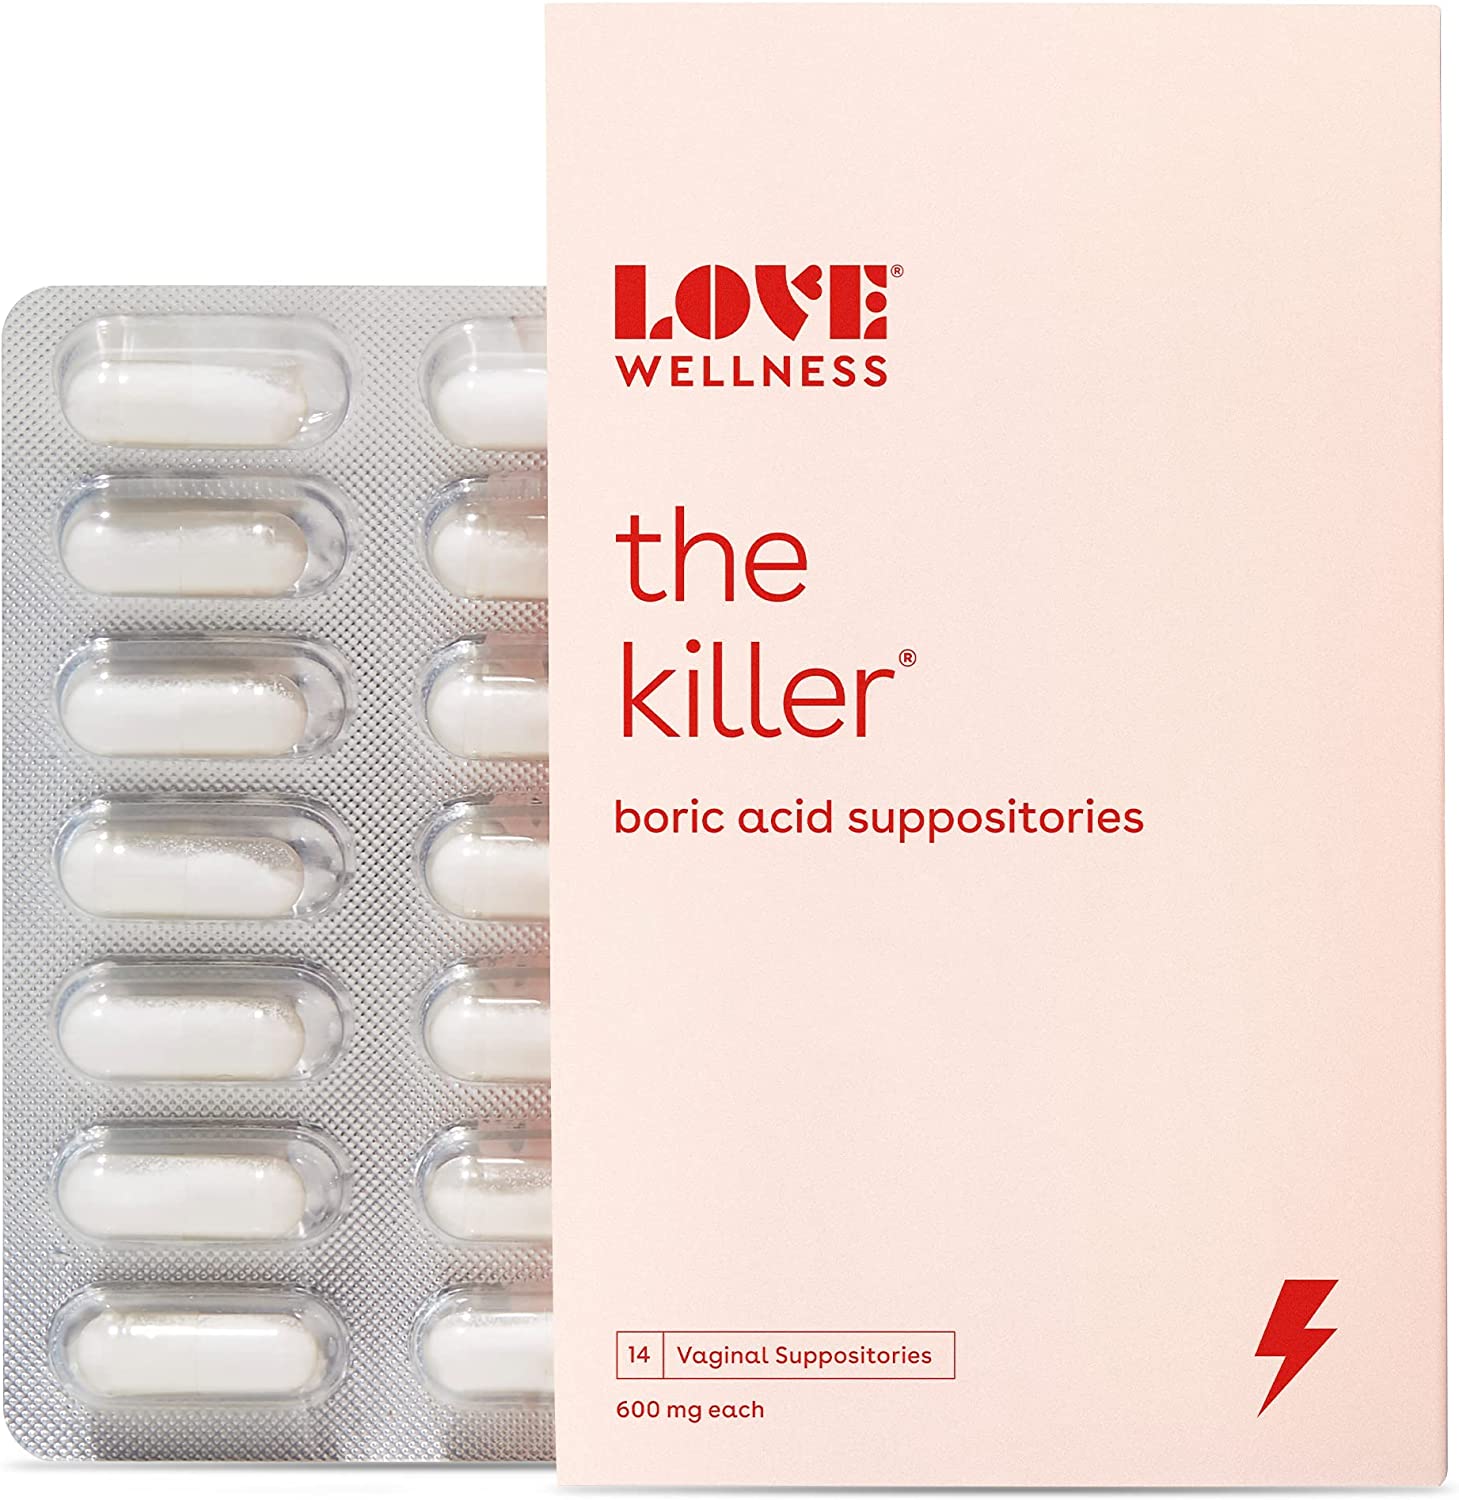 Love Wellness The Killer, 14 Boric Acid Suppositories – Maintains and Balances Healthy Vaginal pH & Manages Odor – Discomfort & Loss of Intimacy – Feminine Health Developed by Doctors for Women